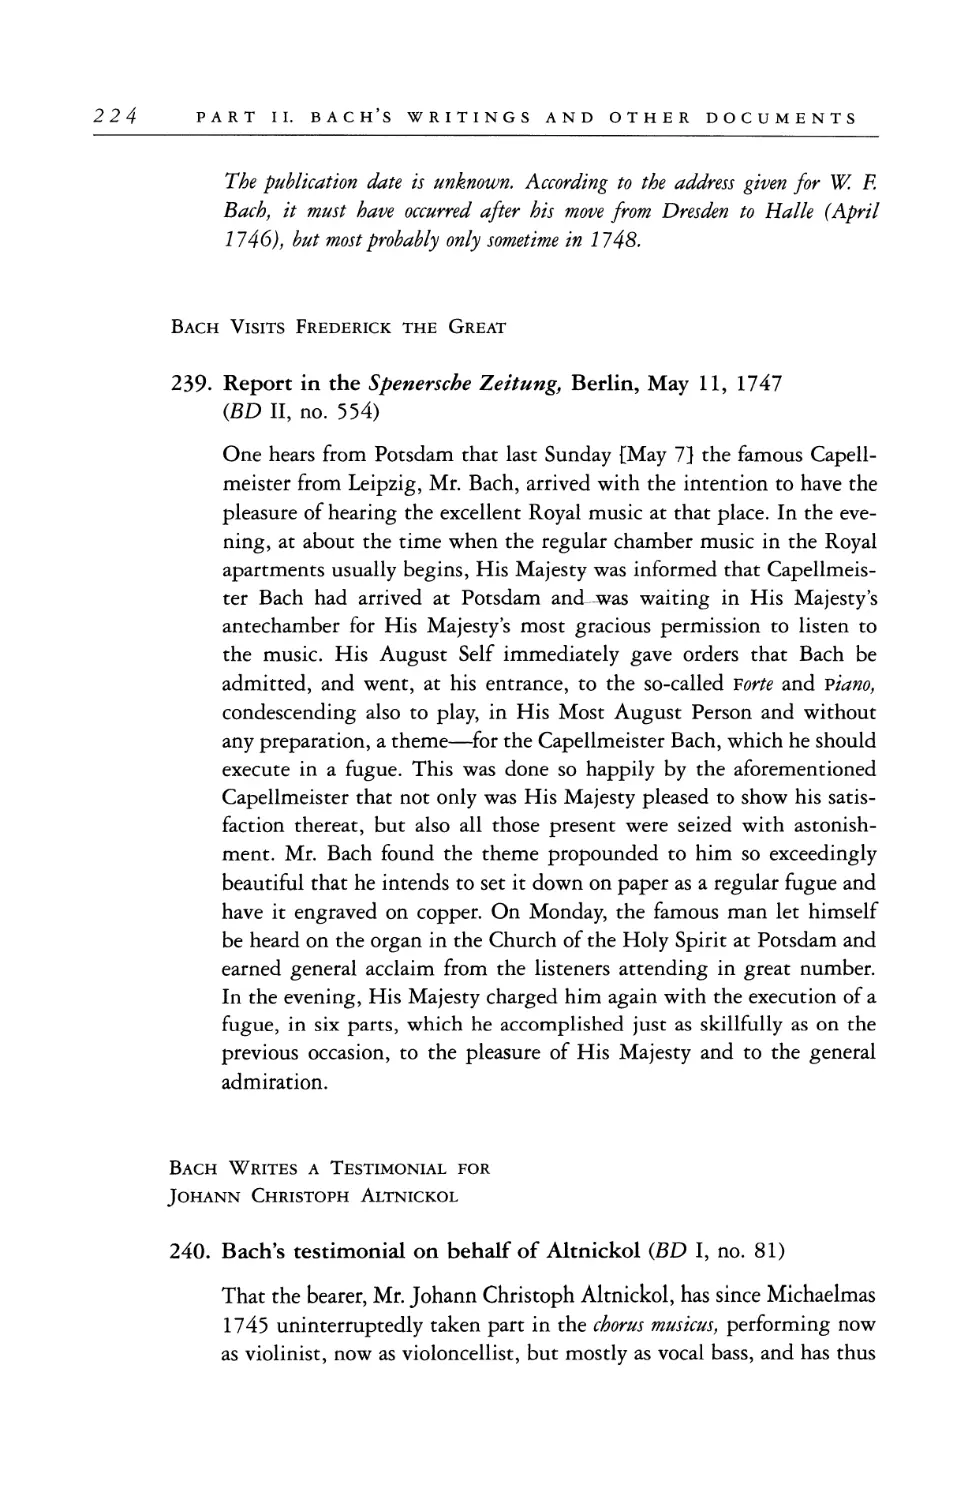 Part III. Early Biographical Documents on Bach